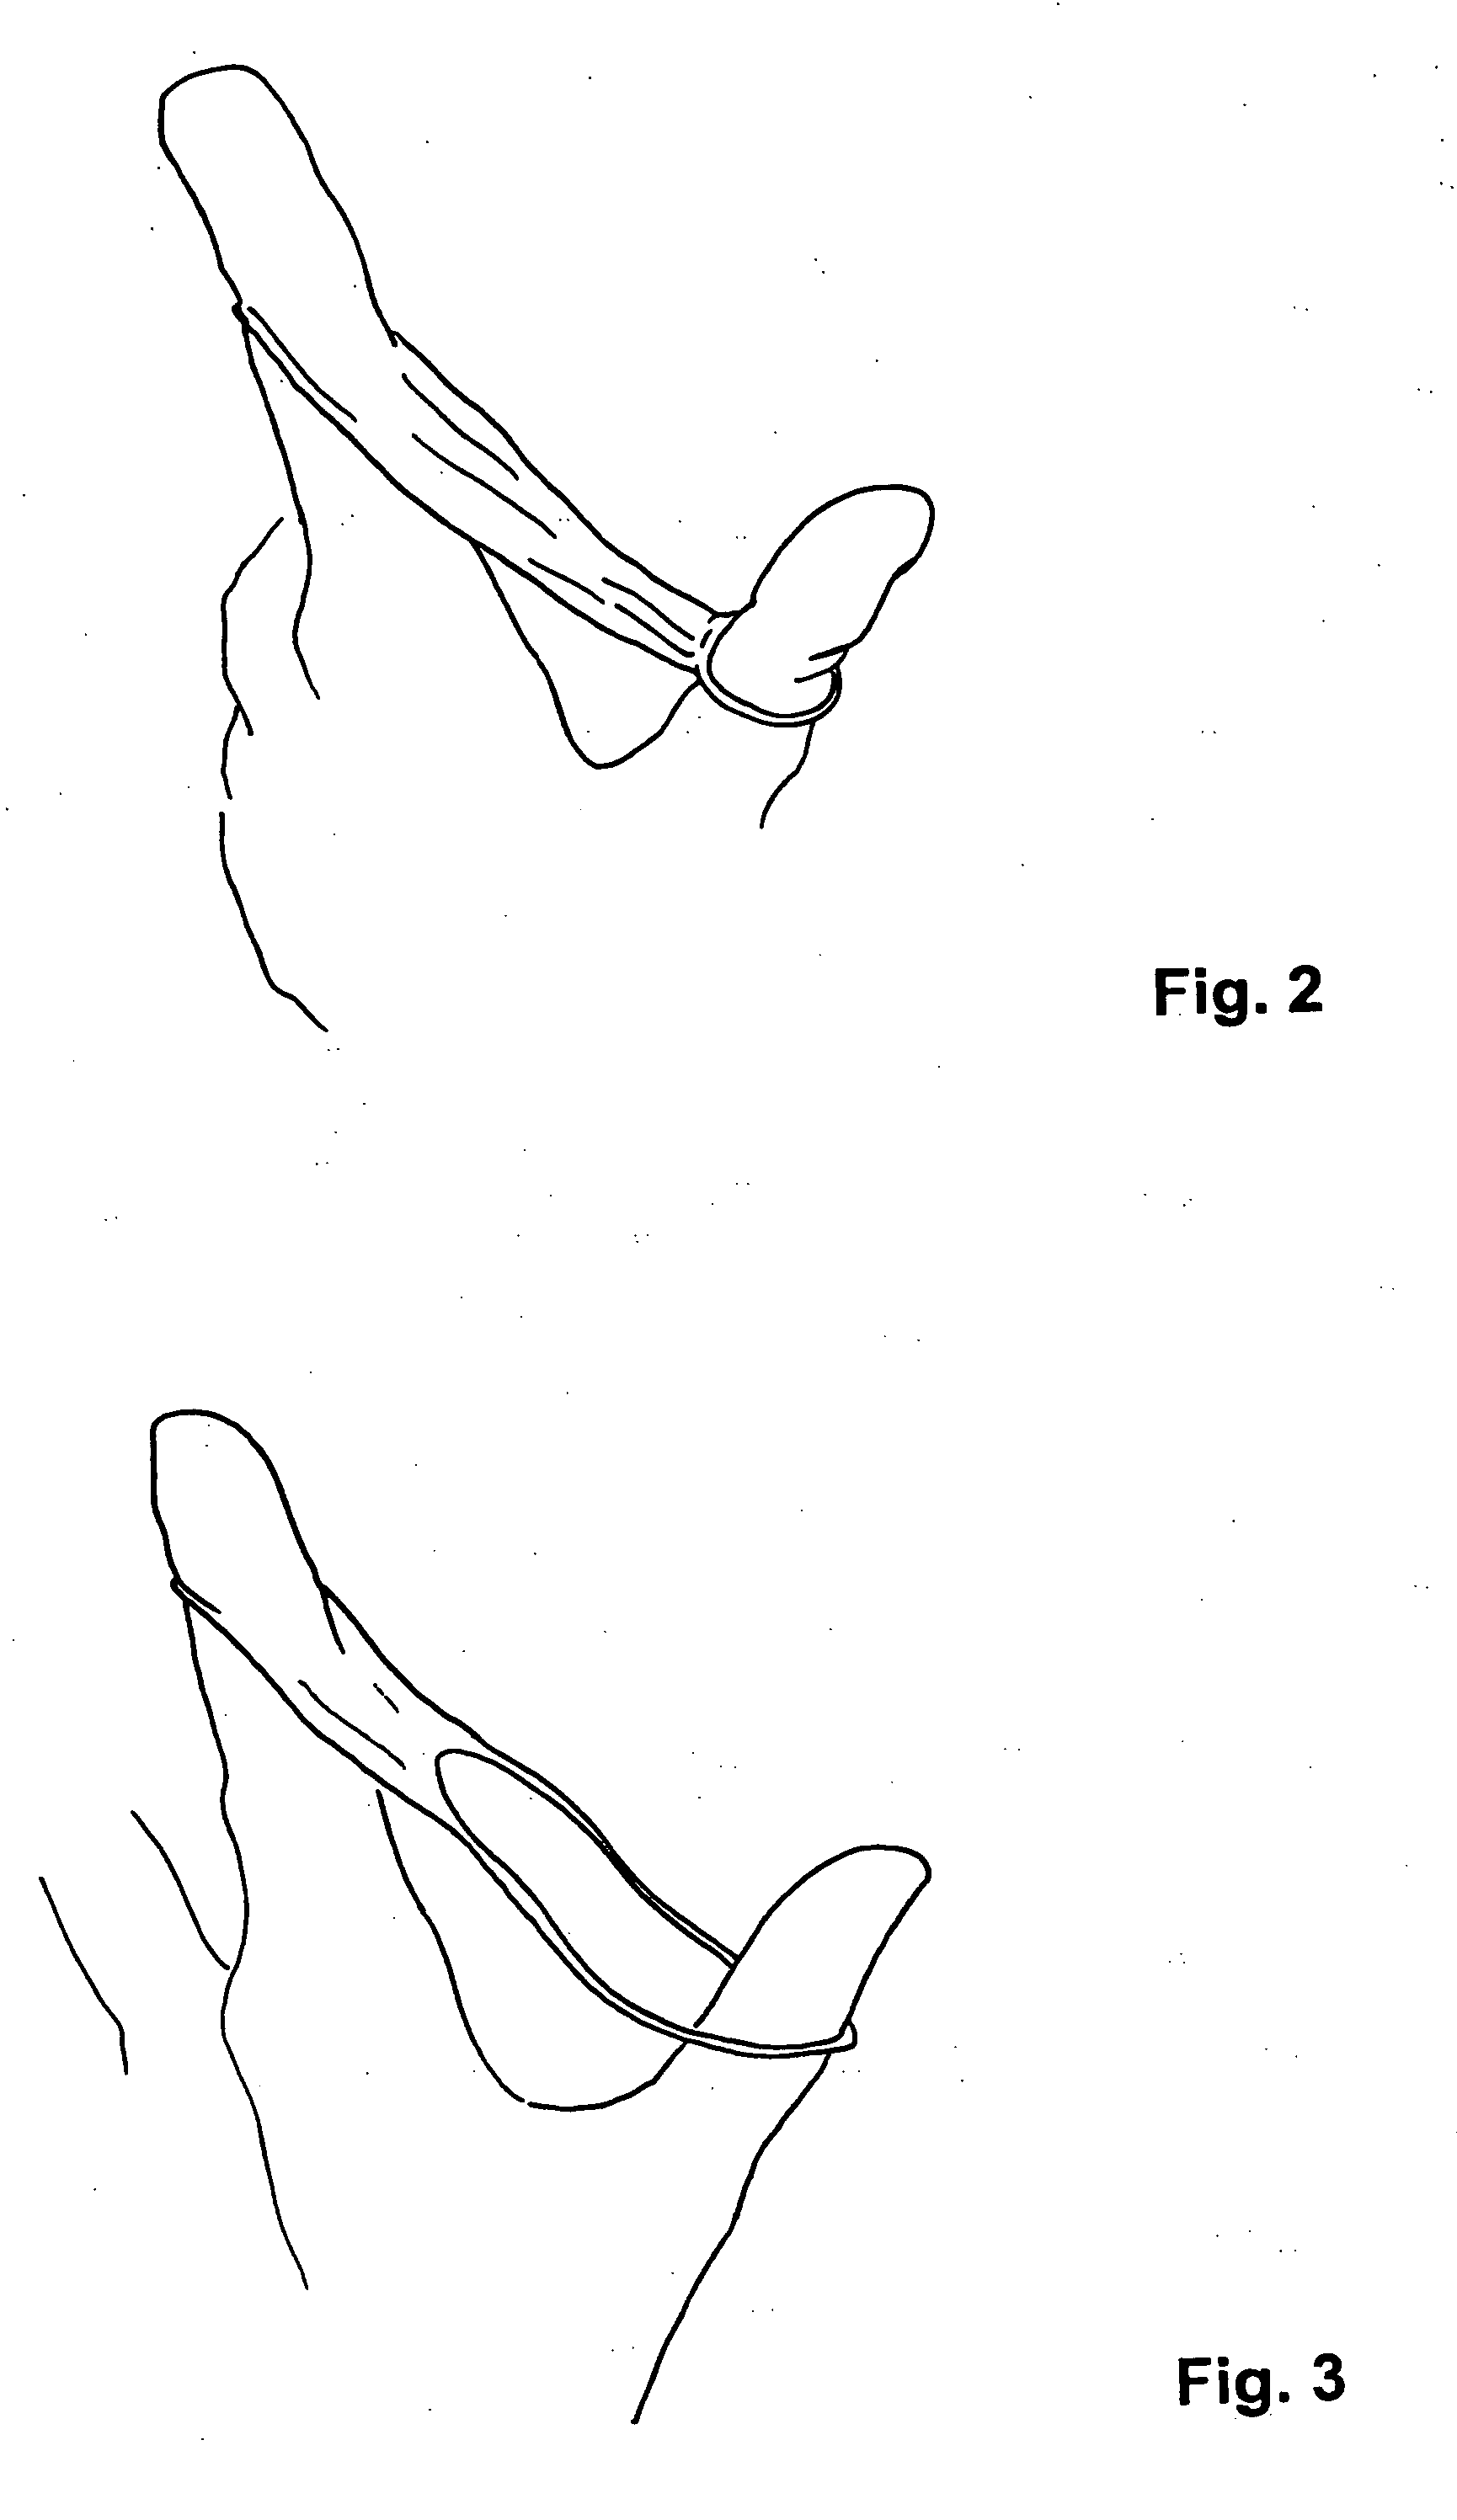 Device allowing careful dental prevention and hygiene